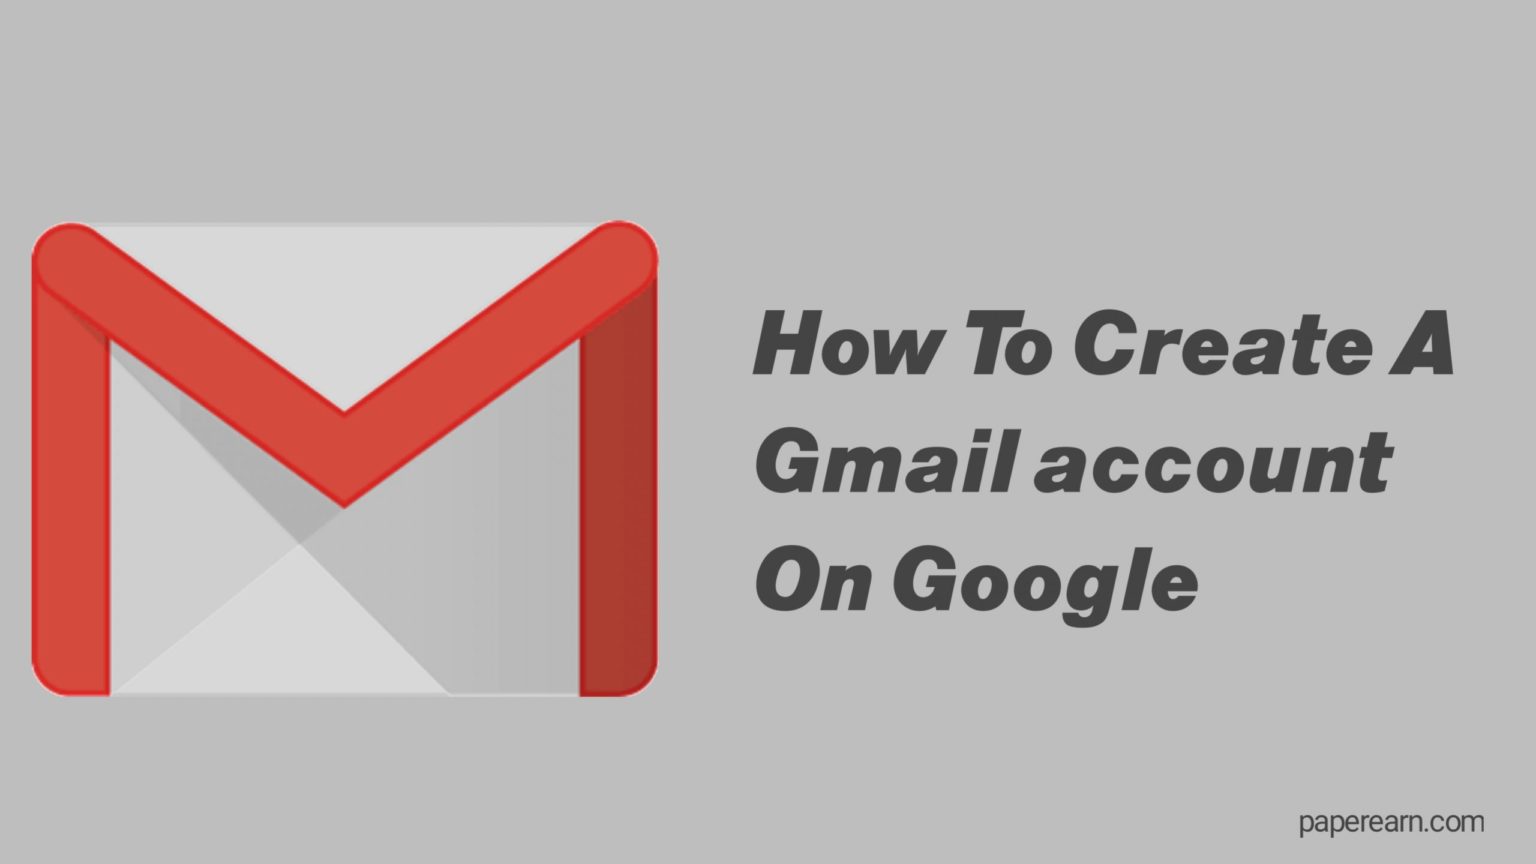 How to create a Gmail account on Google